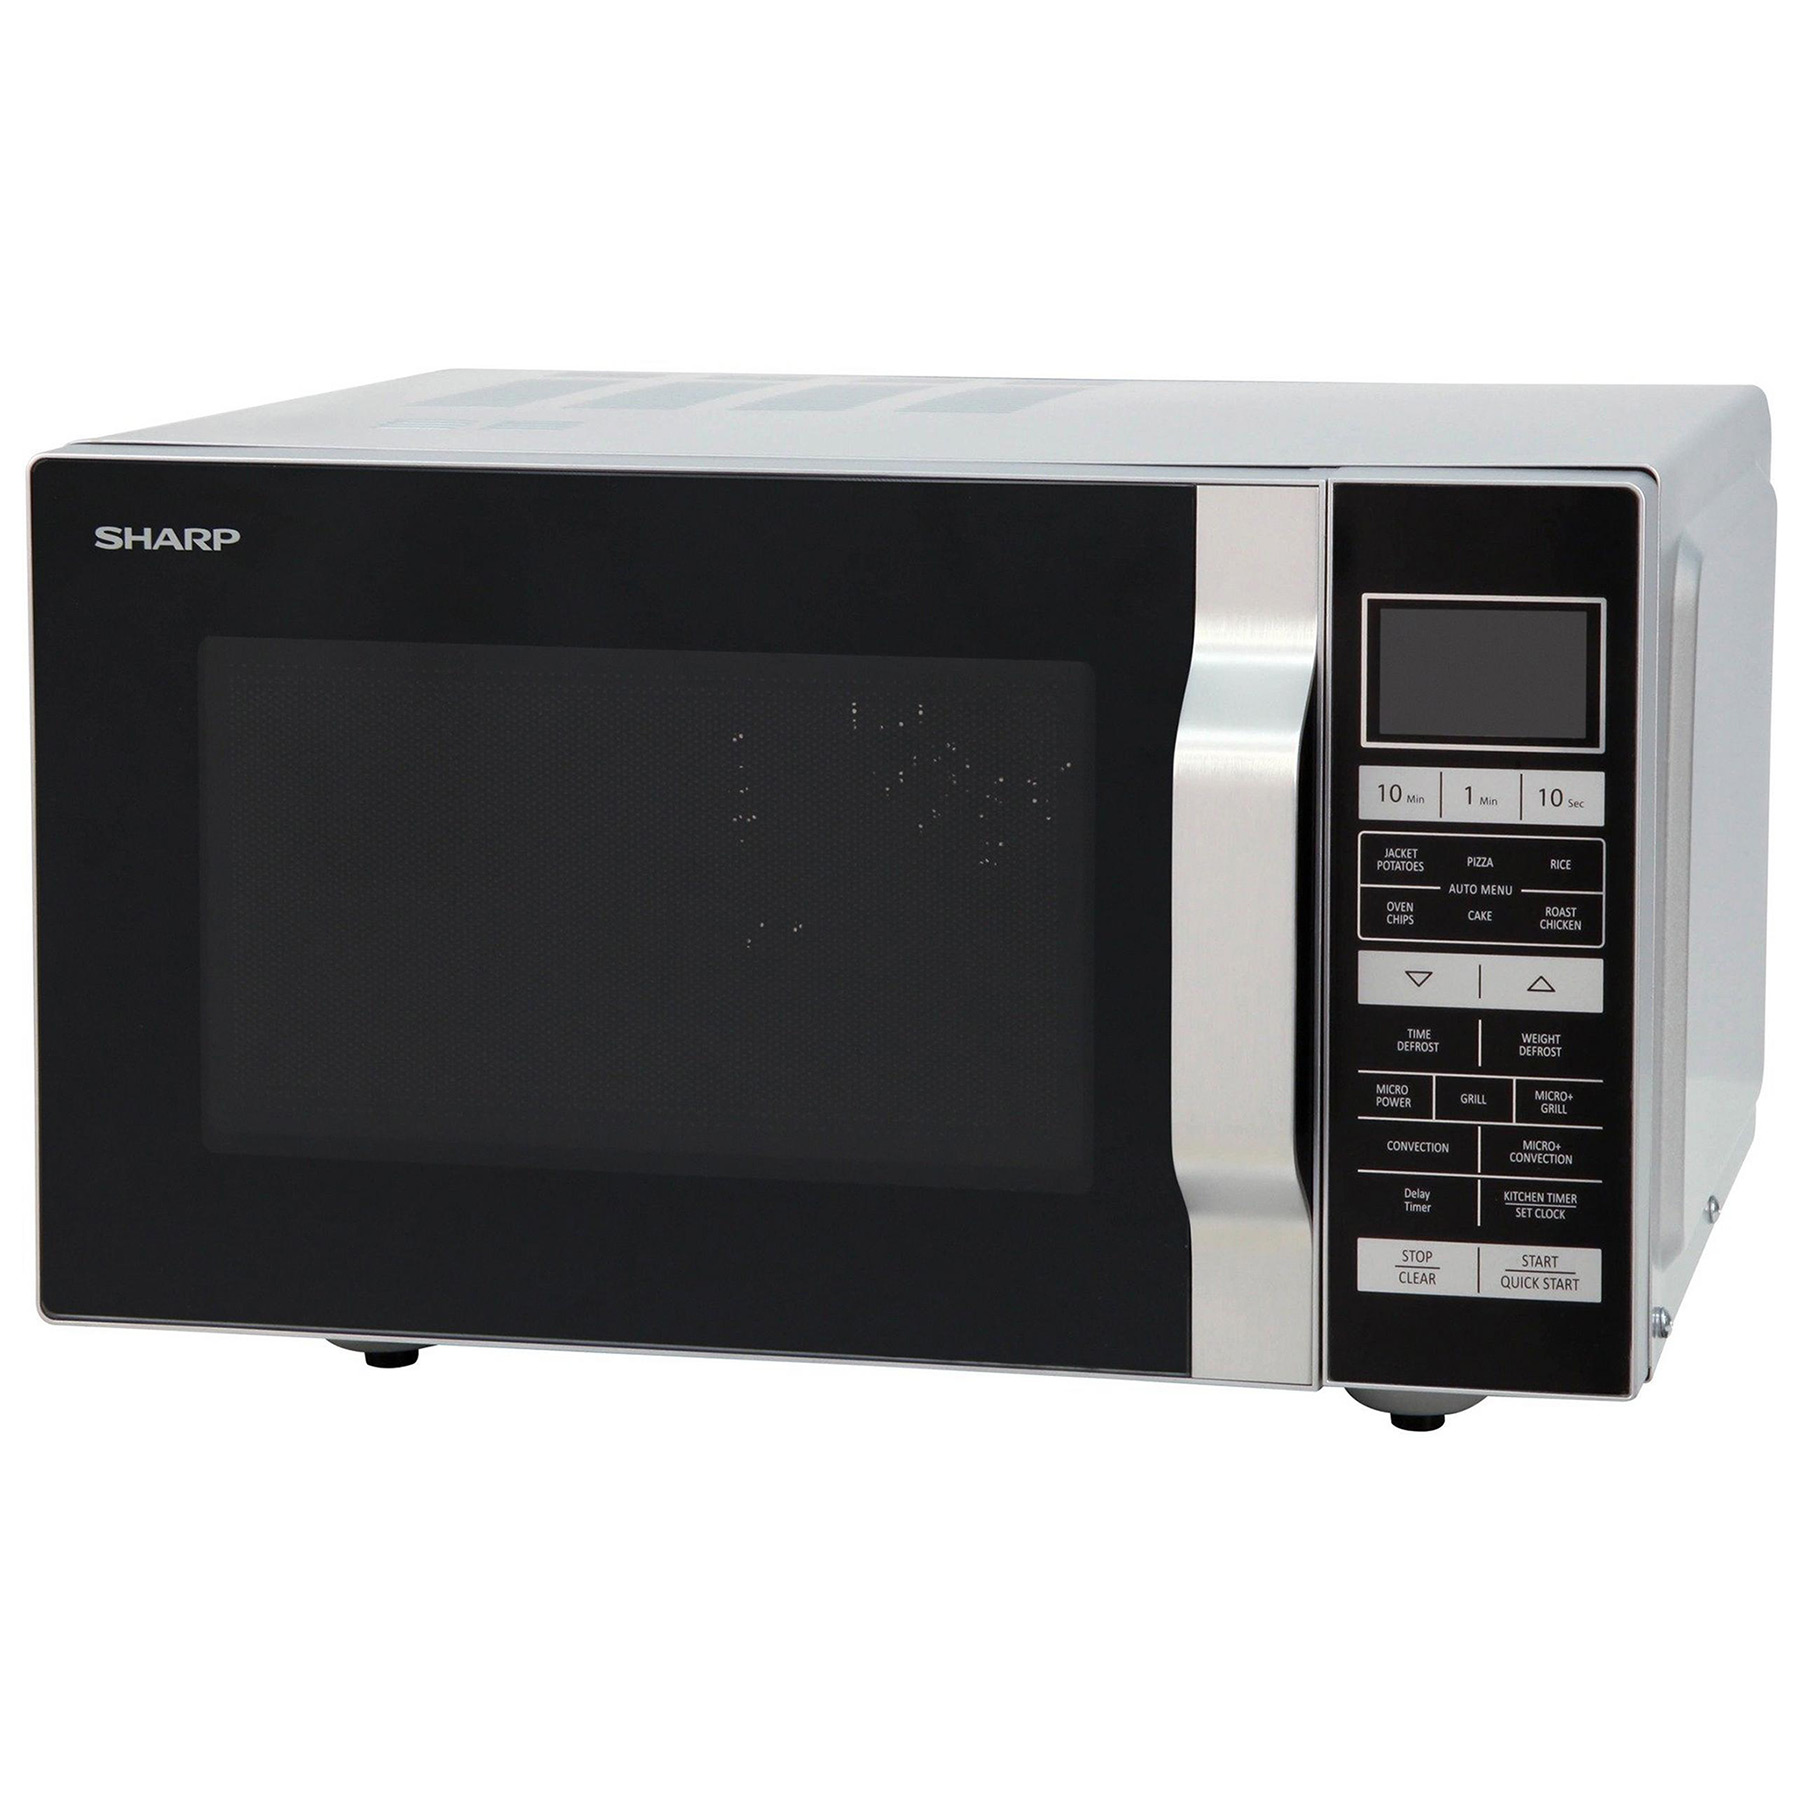 Sharp R860SLM Combination Microwave Oven in Silver 25L 900W 15 Prog